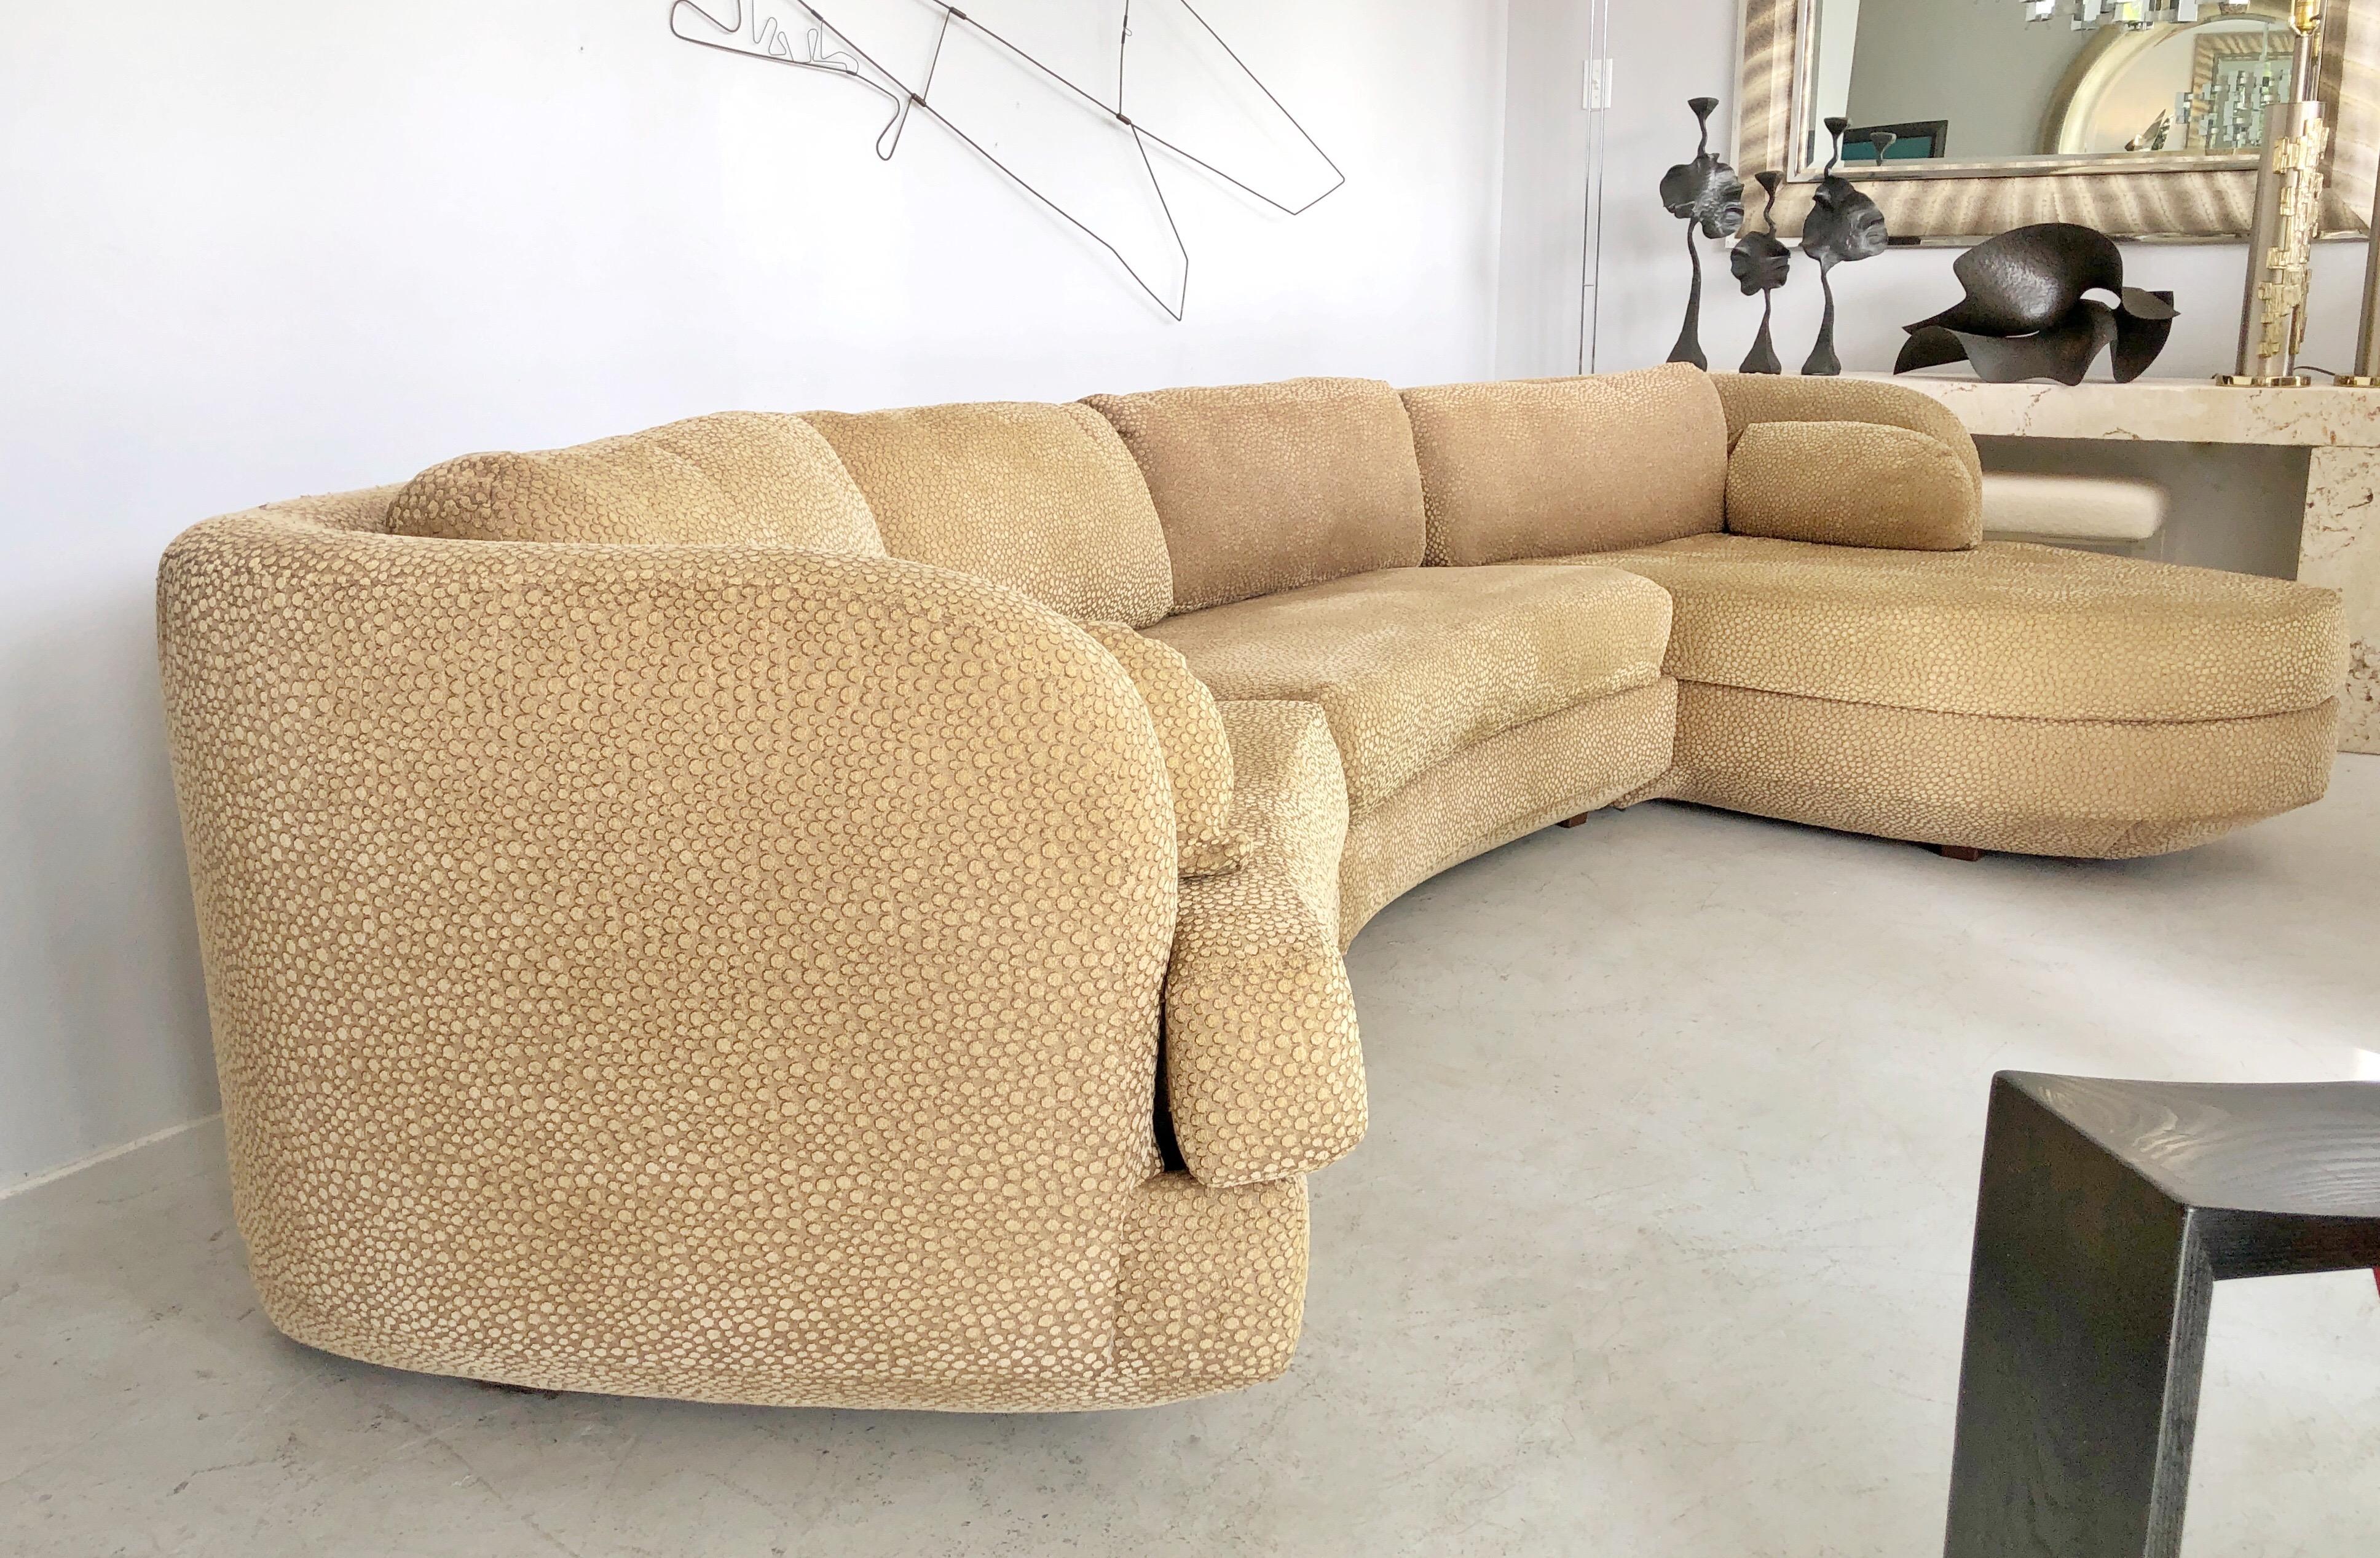 A curved sectional sofa. 3 pieces with one being an asymmetrical chaise. The bottom of the sofa angles back creating a floating visual sensation. Down pillows on back. Chaise length is 63”.